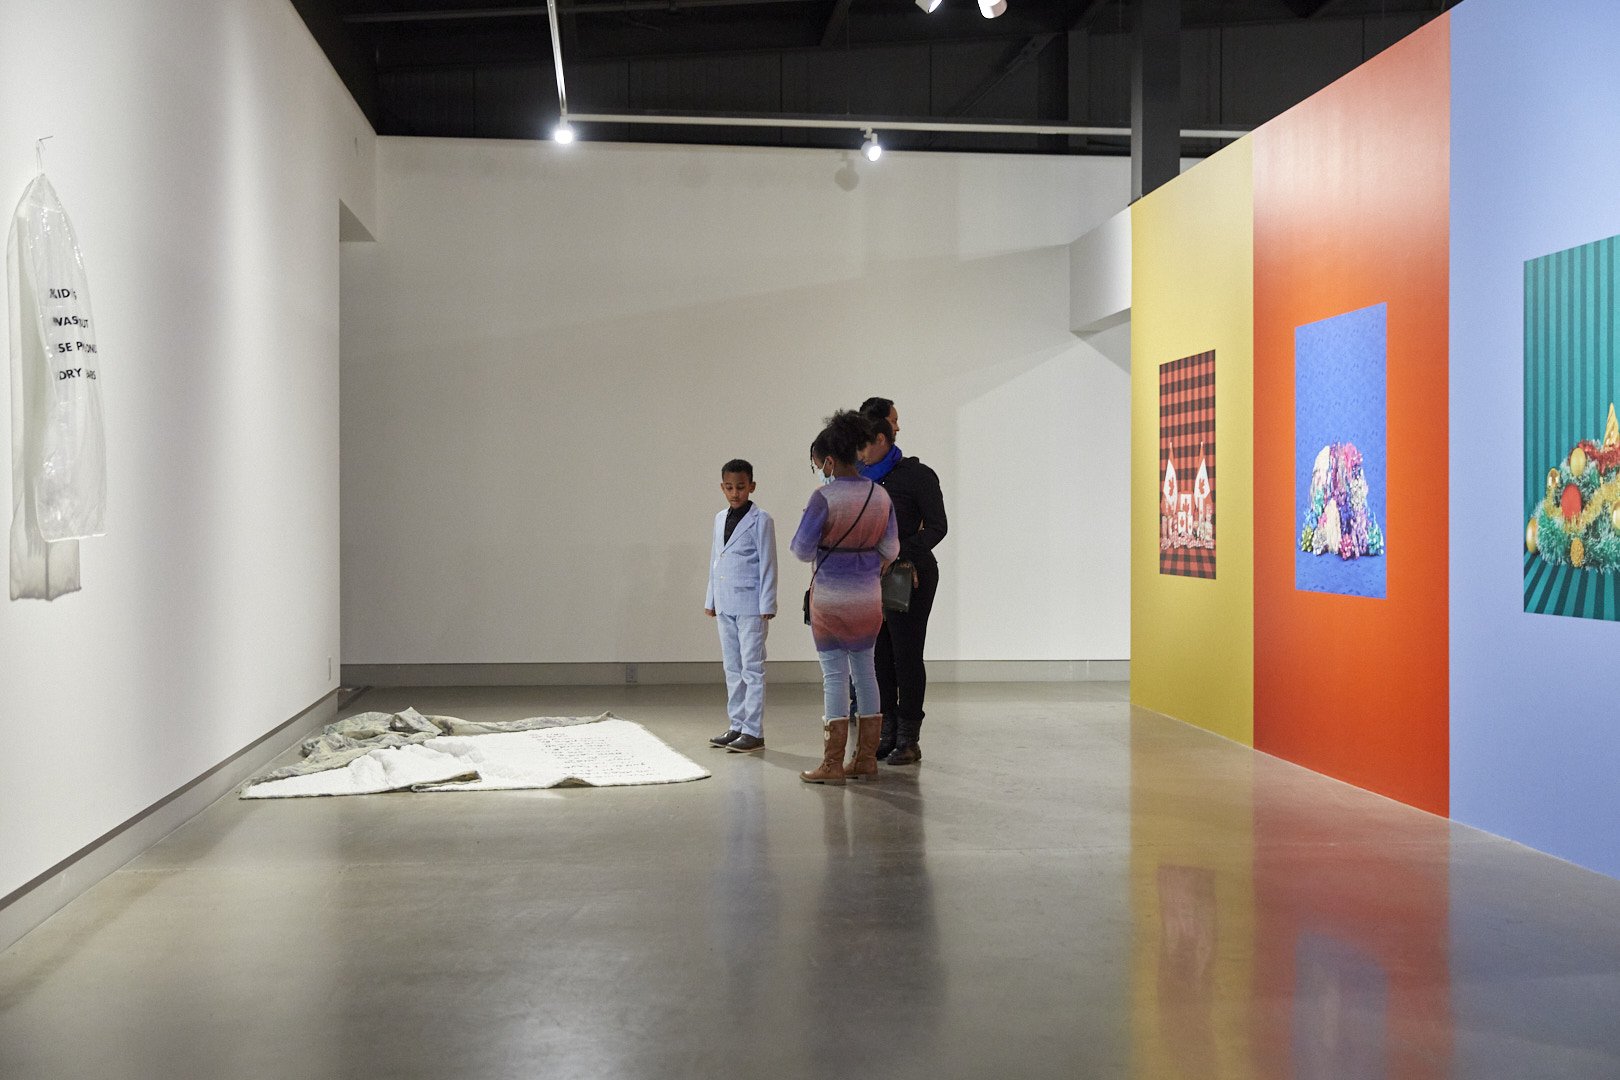 Installation view, Human Capital, October 13, 2022 - April 16, 2023, Contemporary Calgary. Photo by Jesse Tamayo.